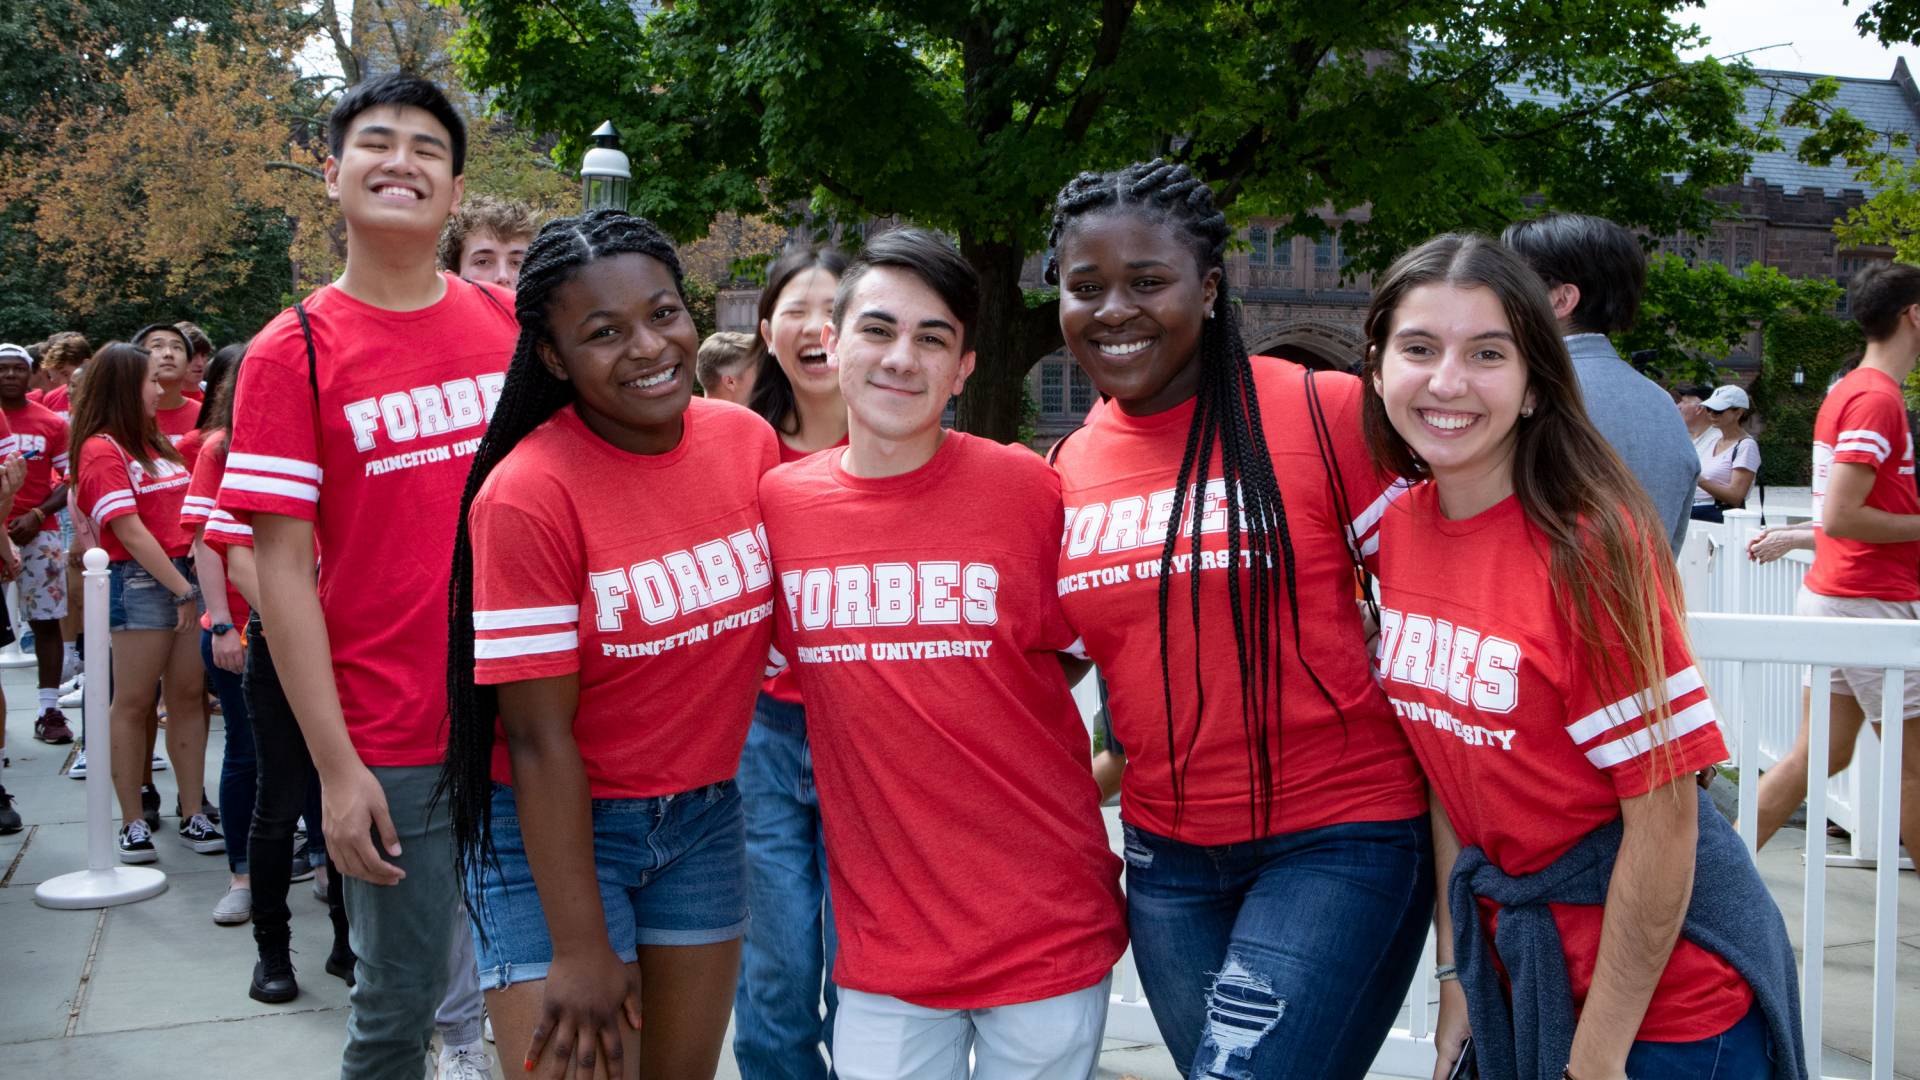 Students wearing Forbes t shirts pose for a photo